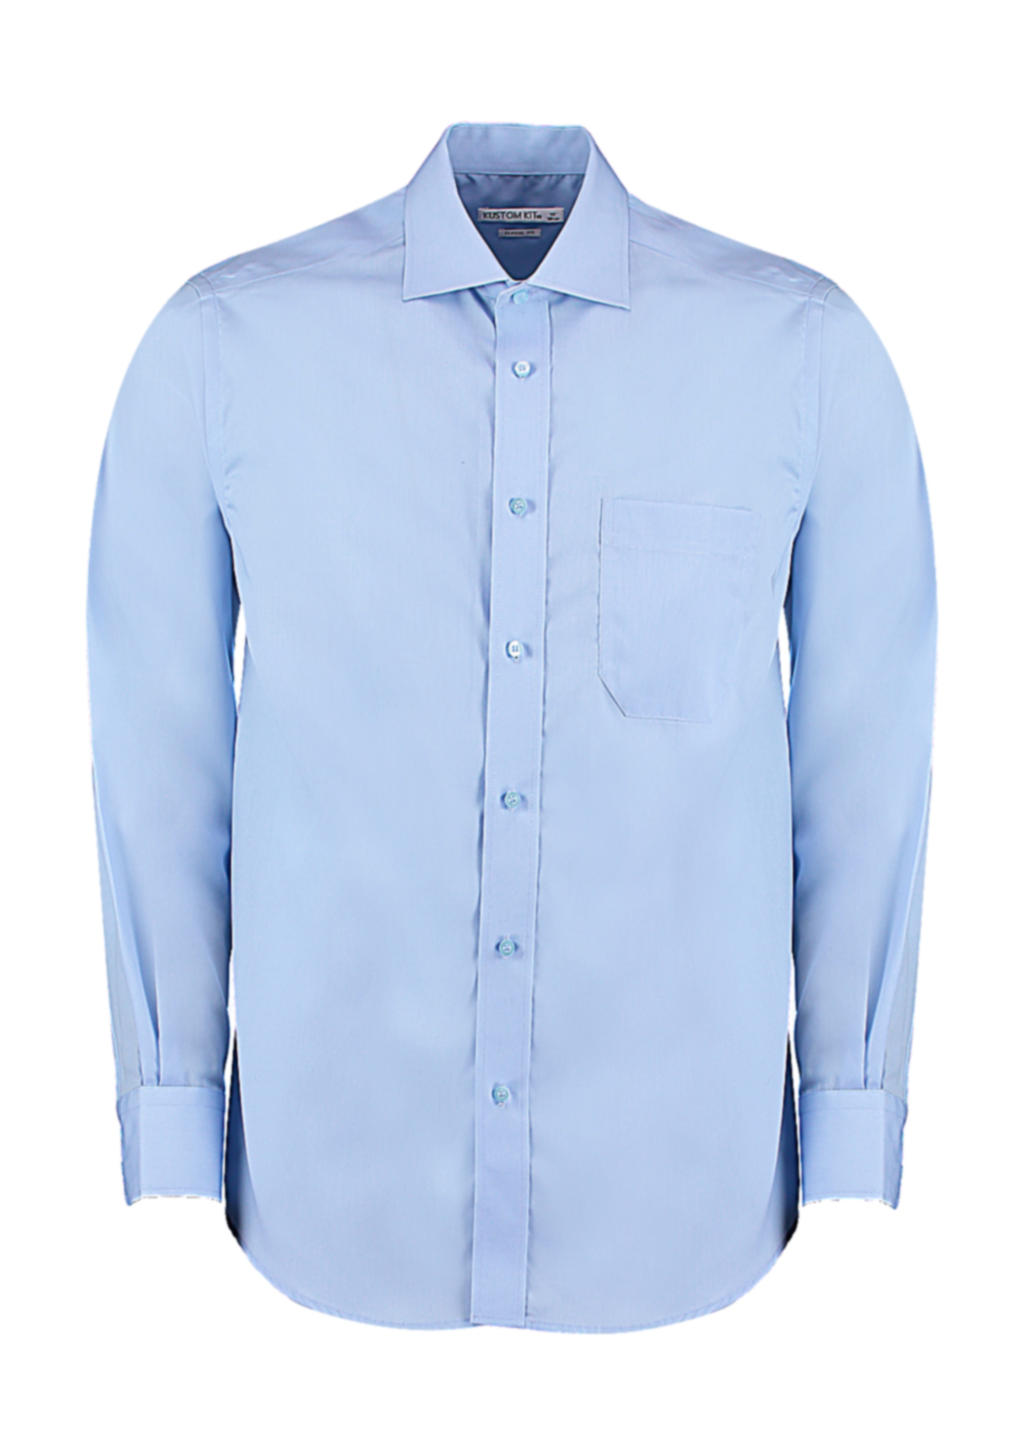  Classic Fit Non Iron Shirt in Farbe Light Blue